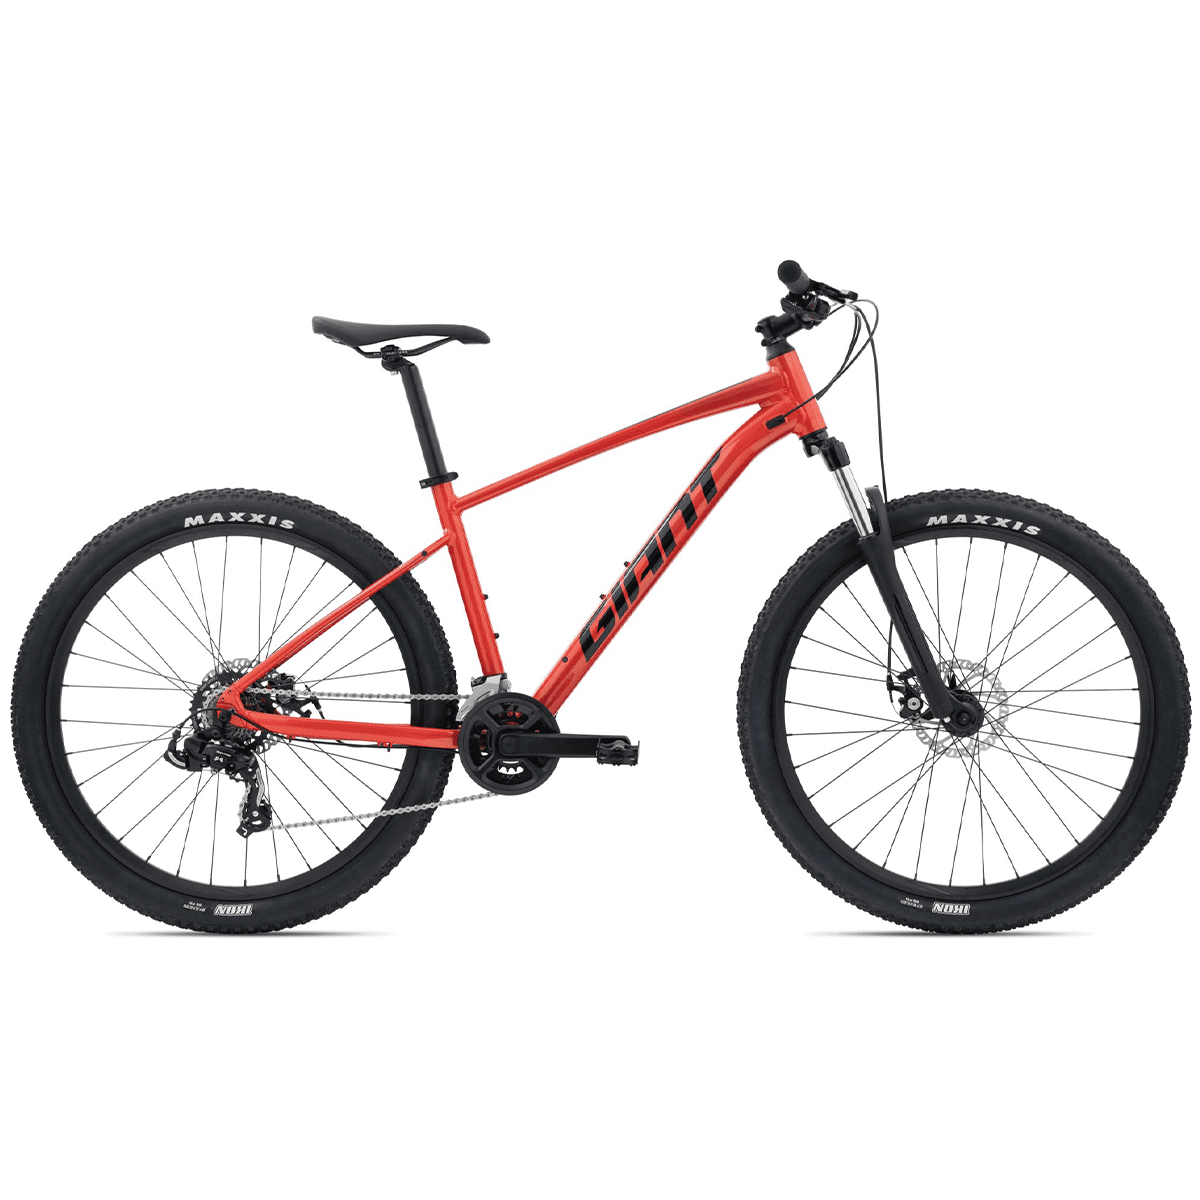 29 inch hardtail